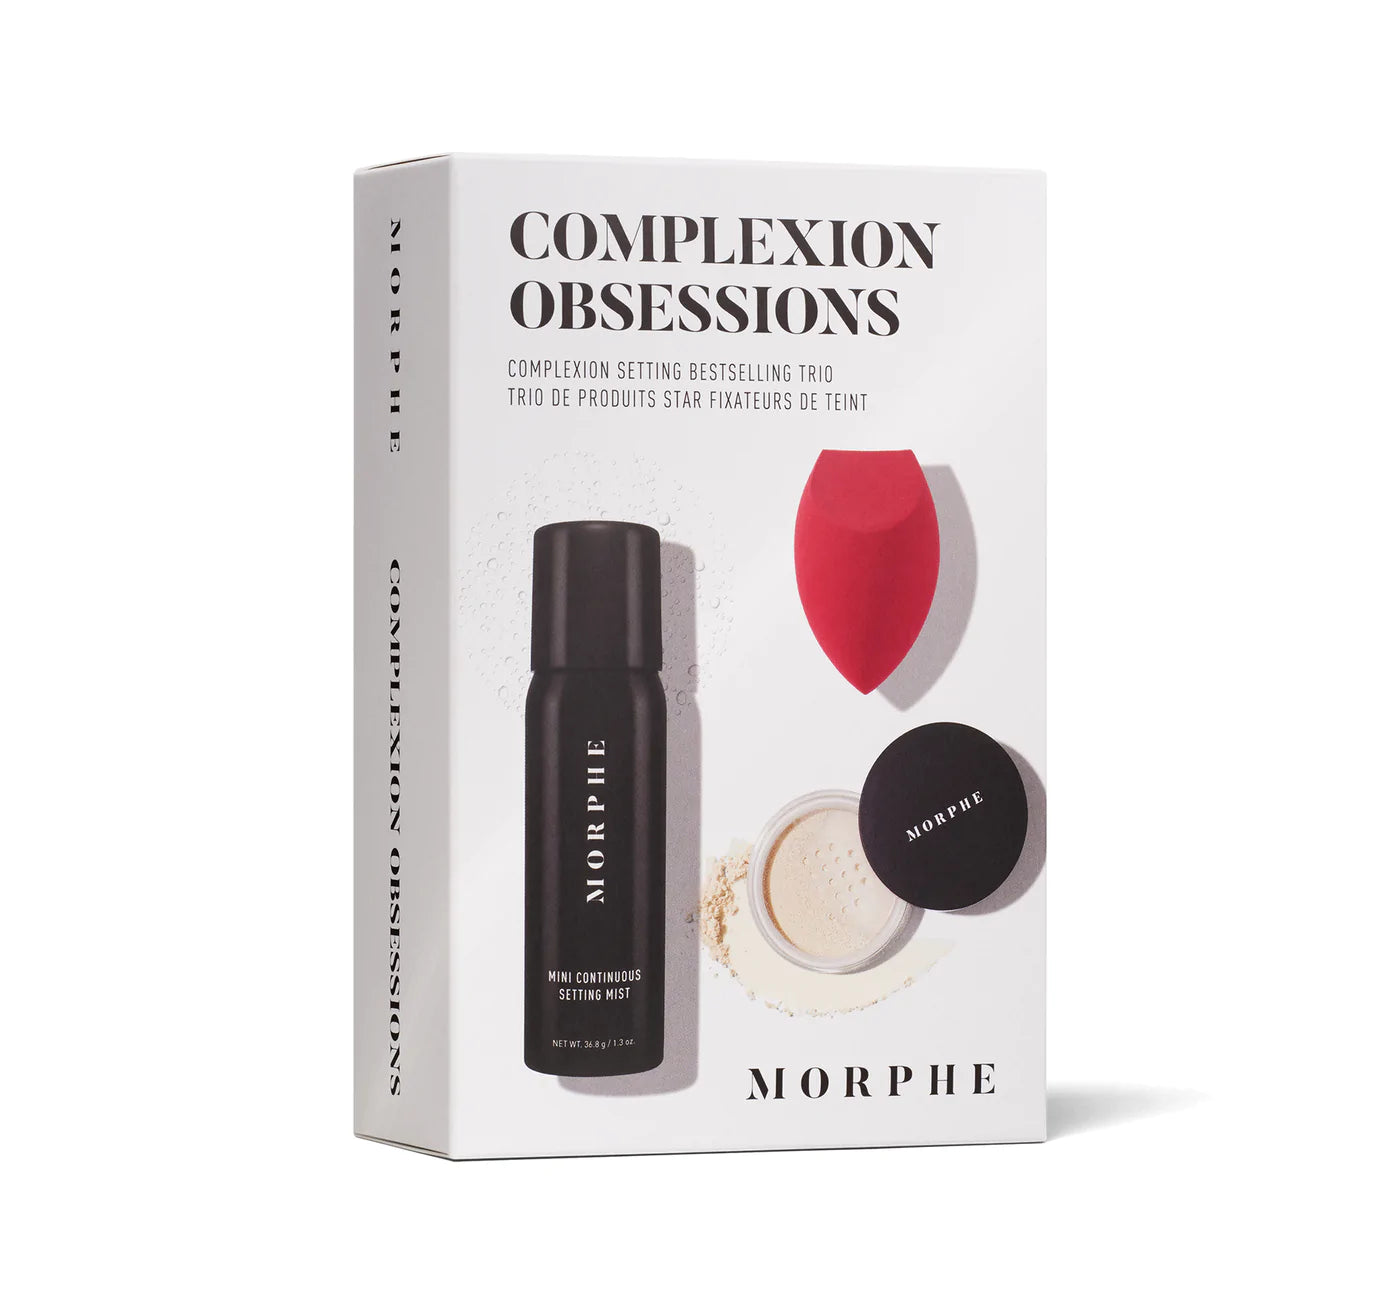 MORPHE Complexion Obsession Complexion Sitting Bestselling Trio بكج مكياج